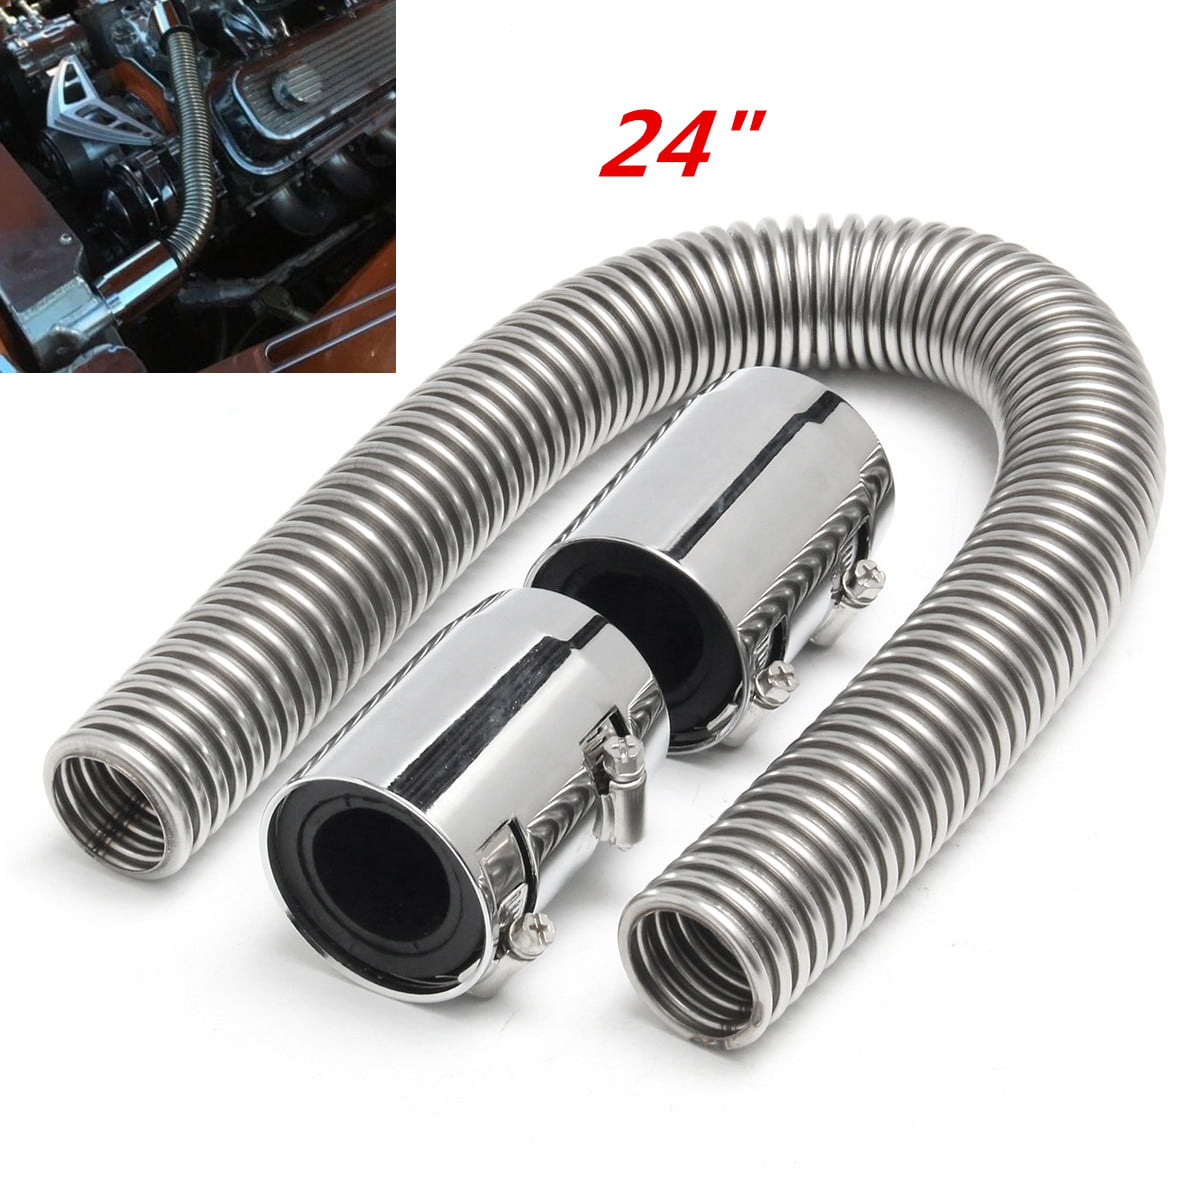 Universal Polished Flexible Stainless Steel Radiator Hose Kit with Chrome Caps